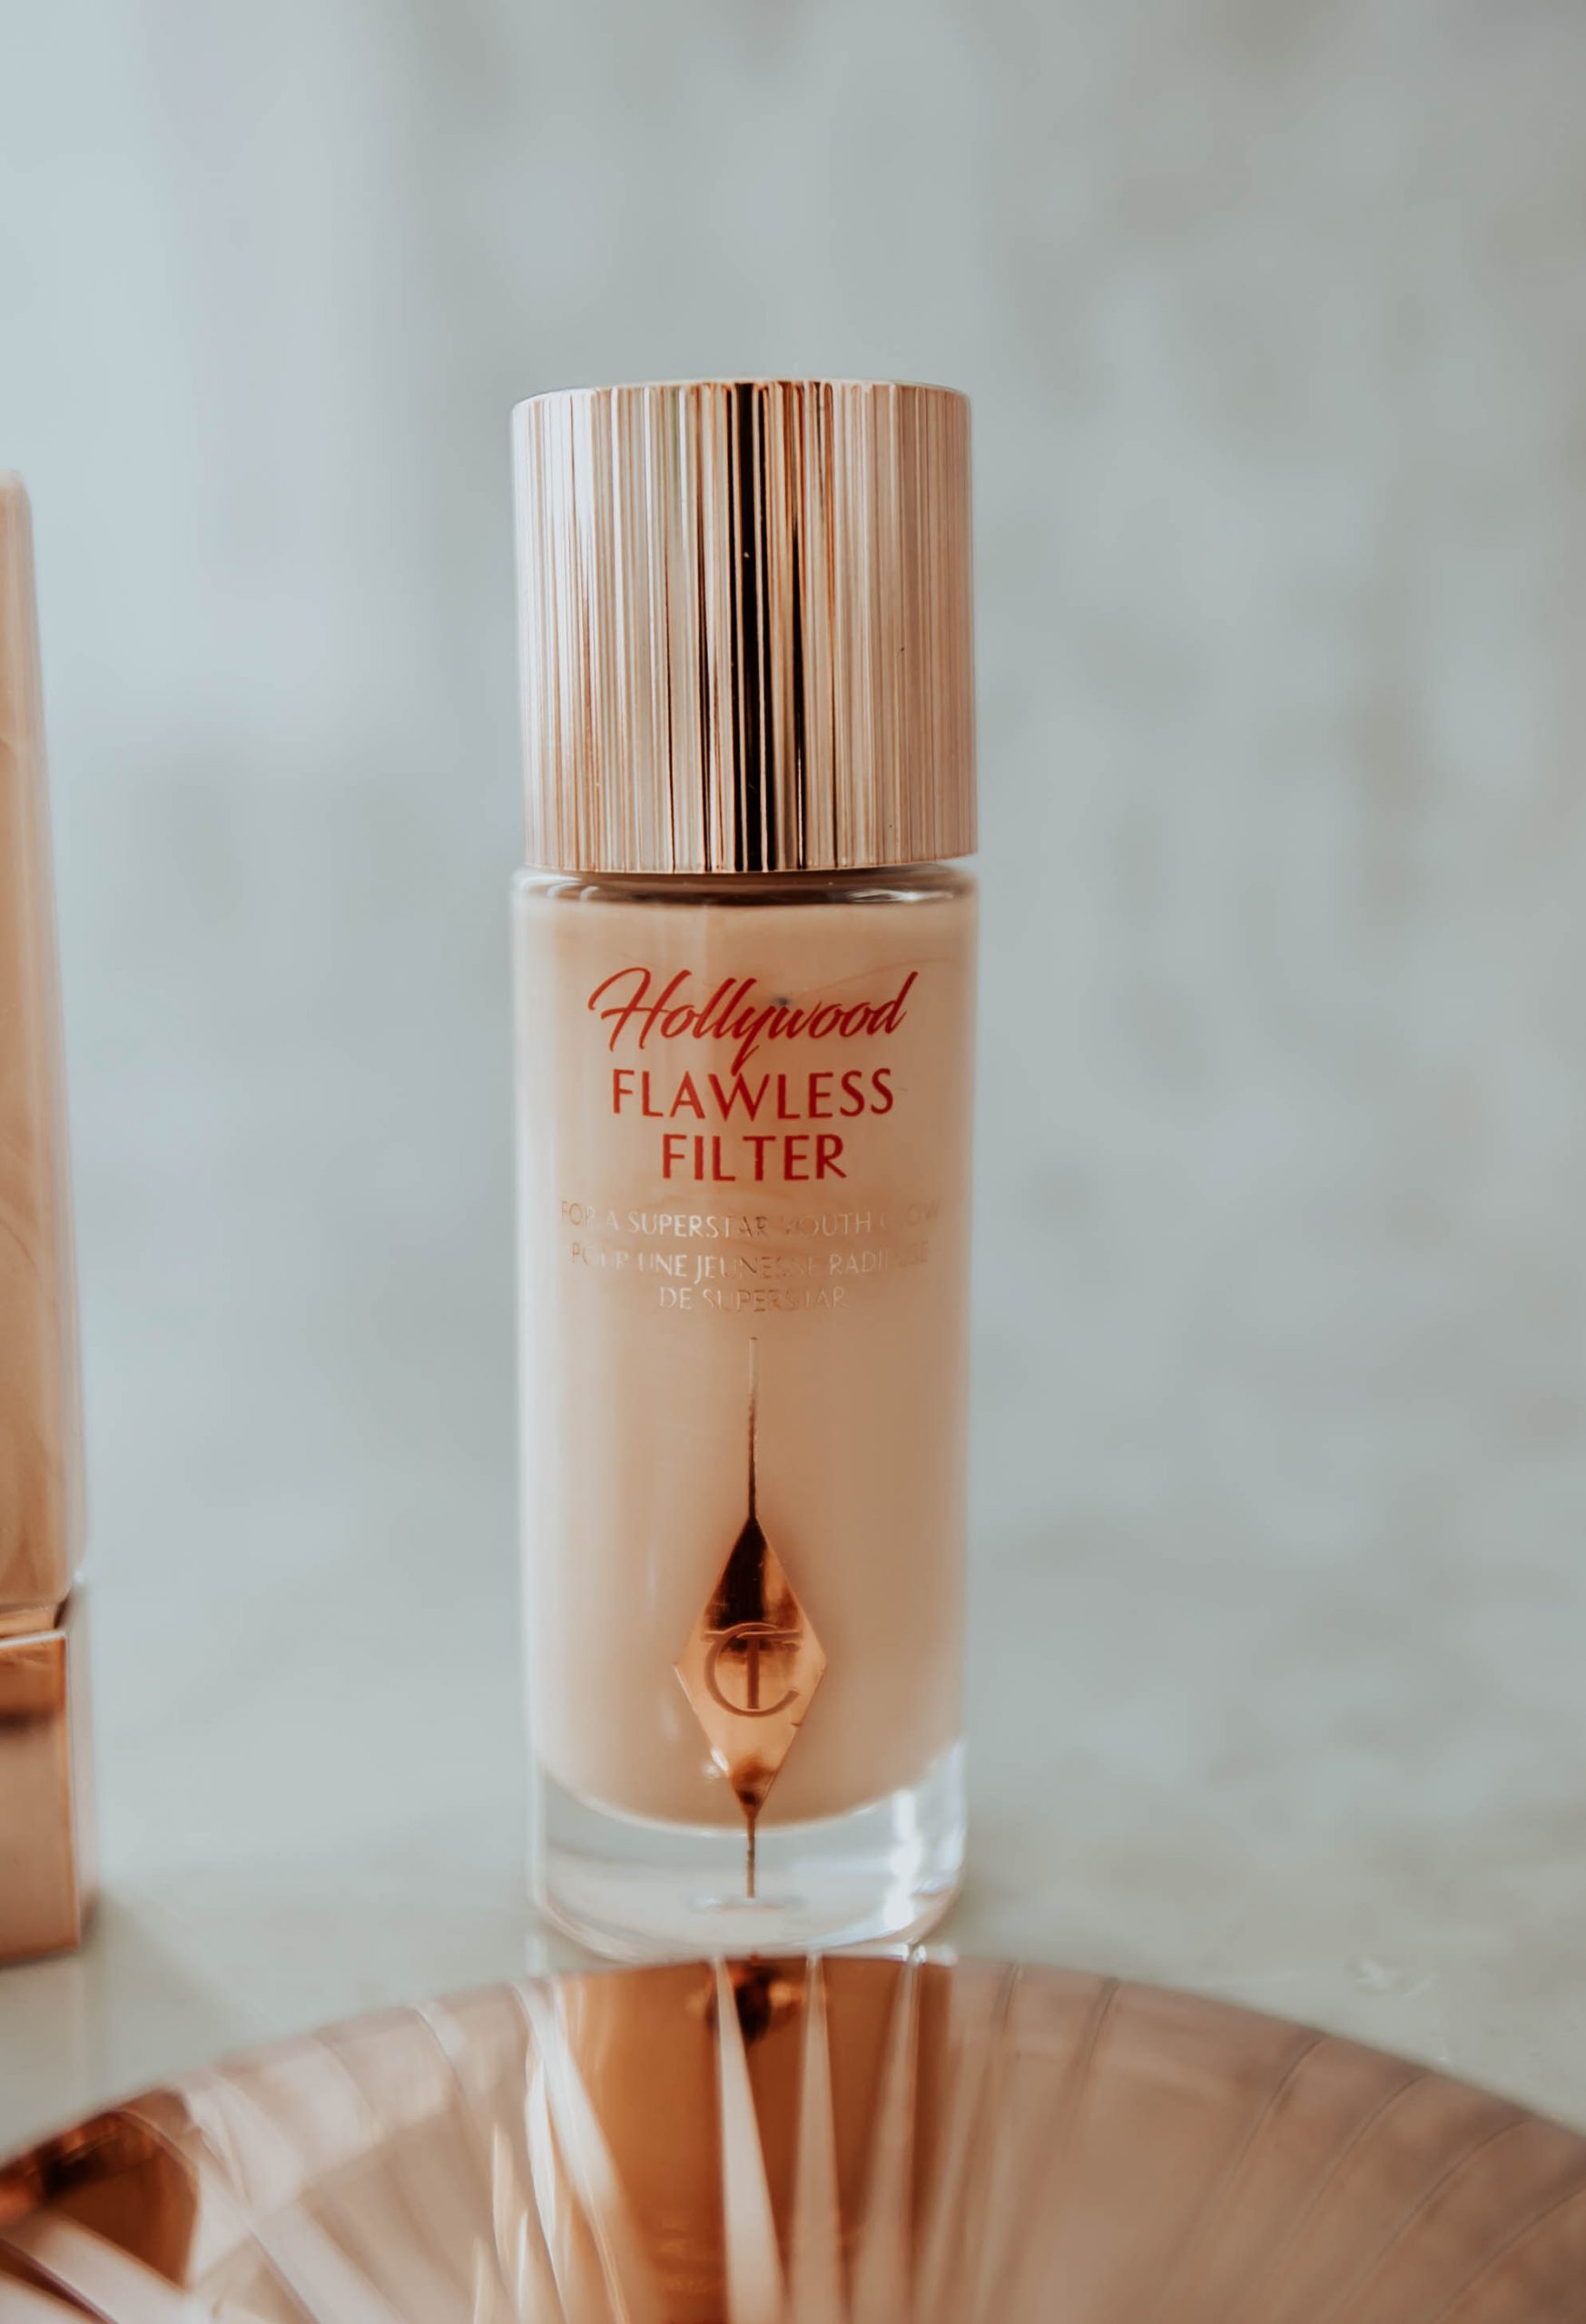 Ash and Em co founder Emily Farren Wieczorek talks about her new steps for flawless holiday skin - Charlotte Tilbury's Flawless Filter. 